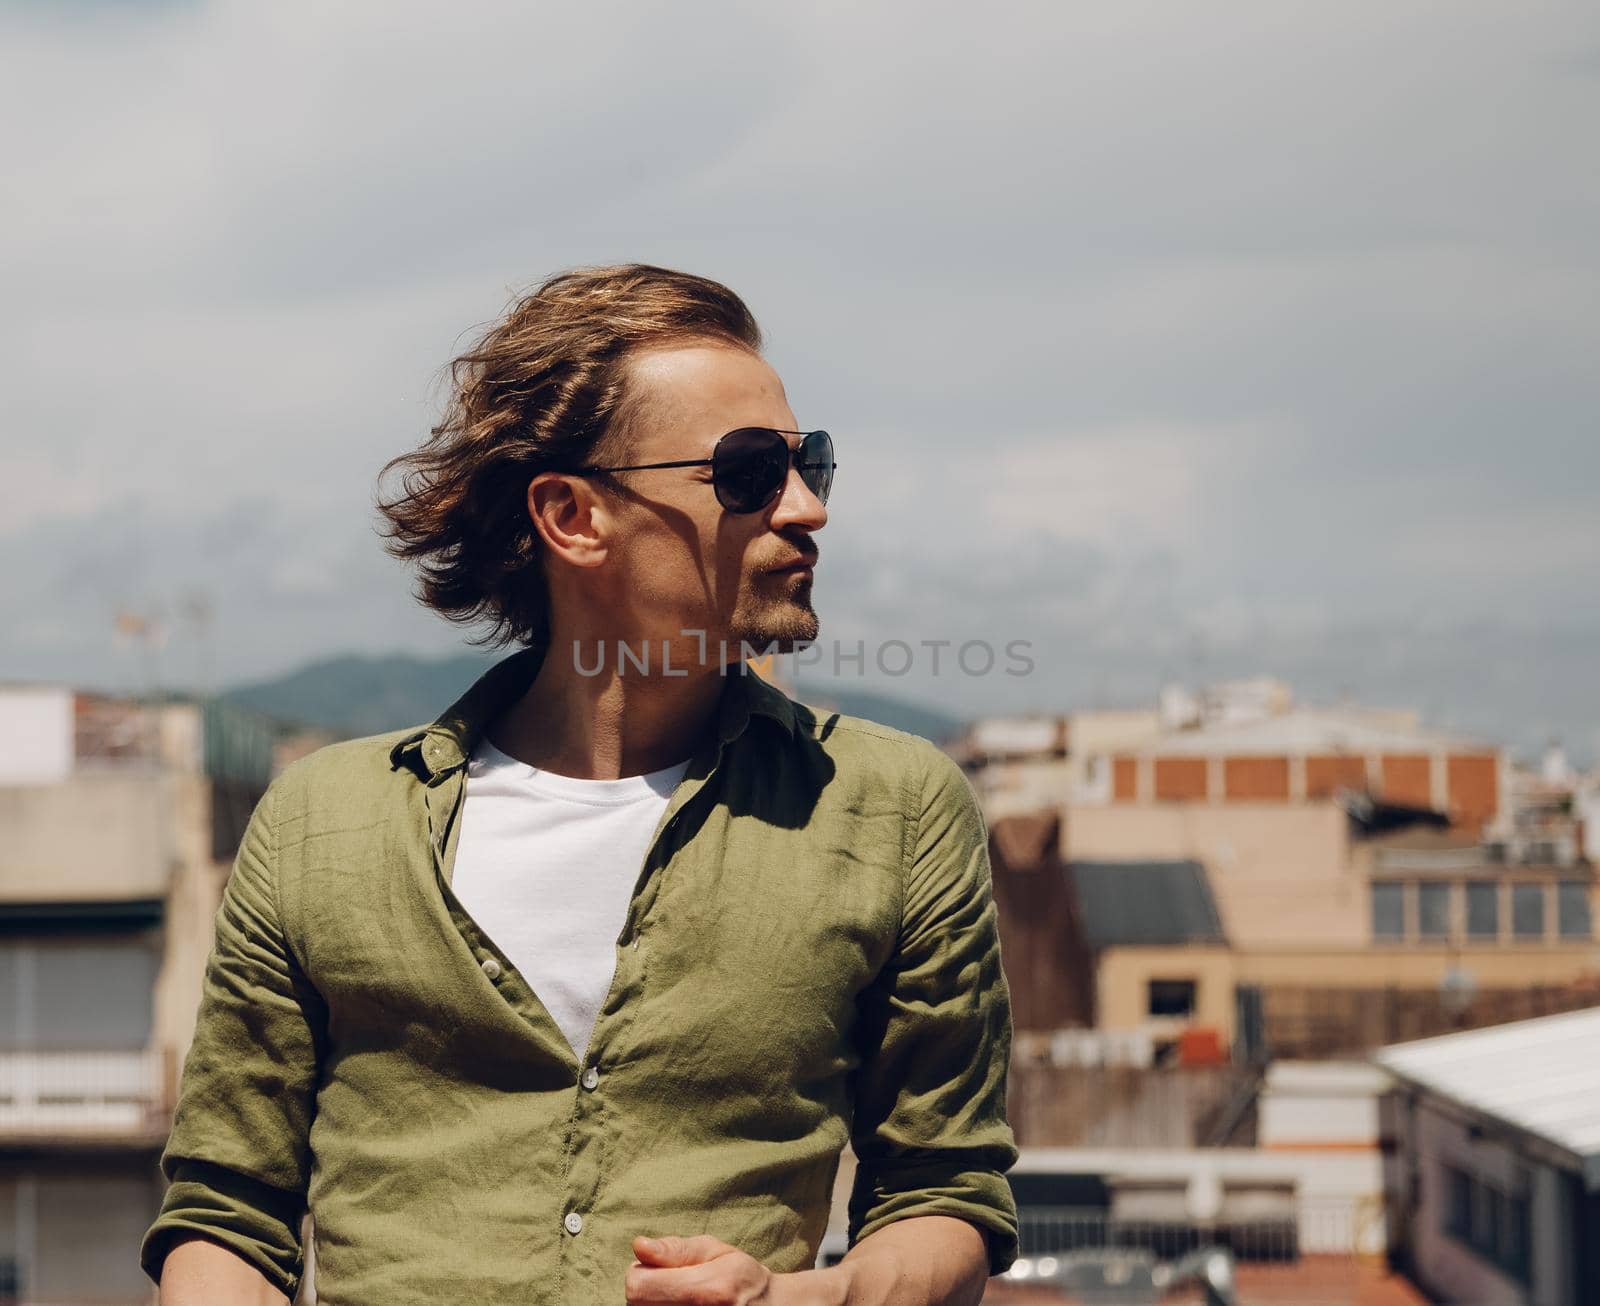 Handsome european man in sunglasses with long hair, standing outdoors and looking to the side